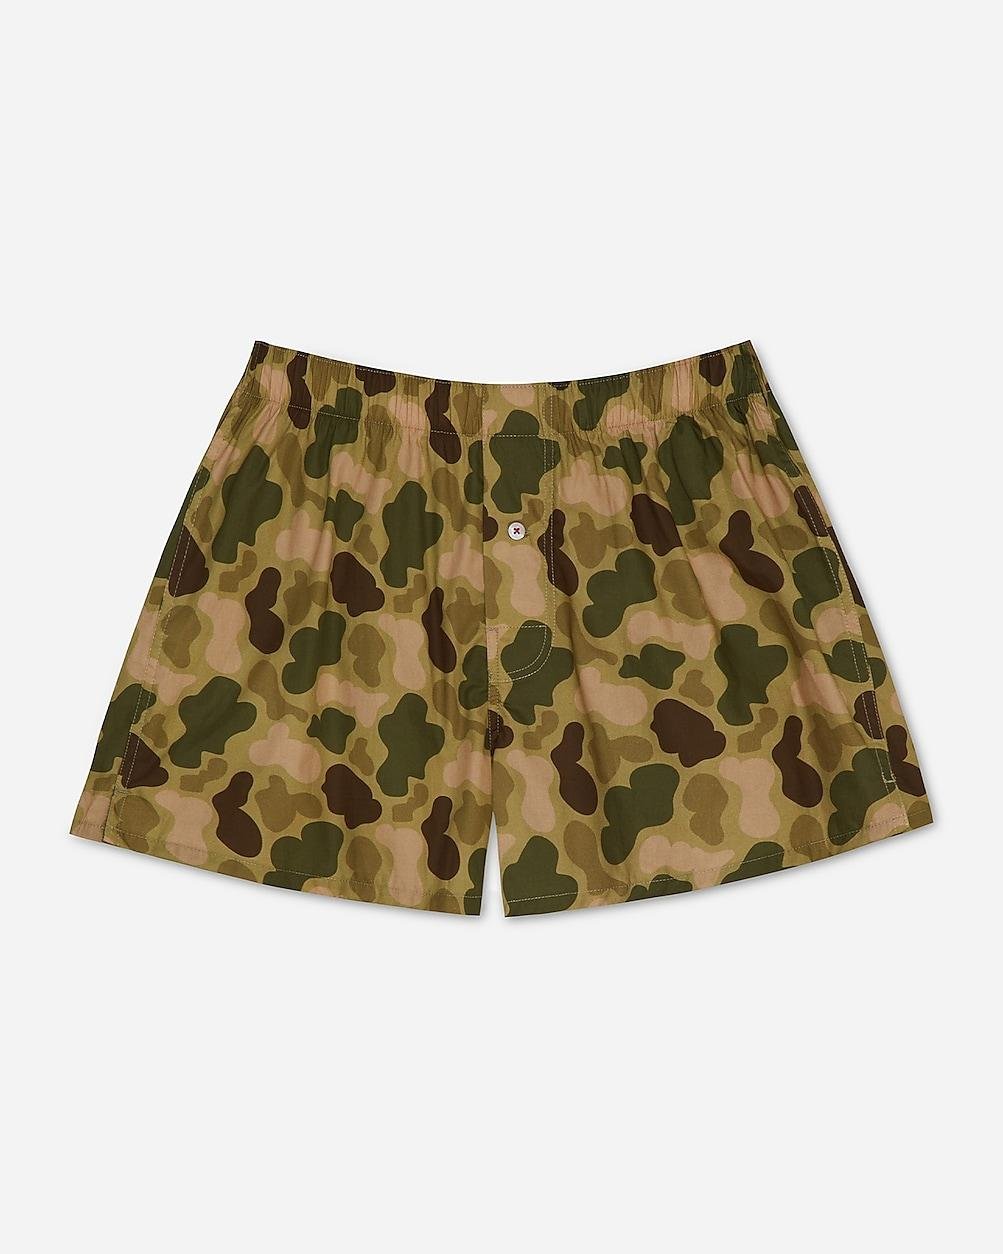 Druthers™ organic cotton boxers by J.CREW